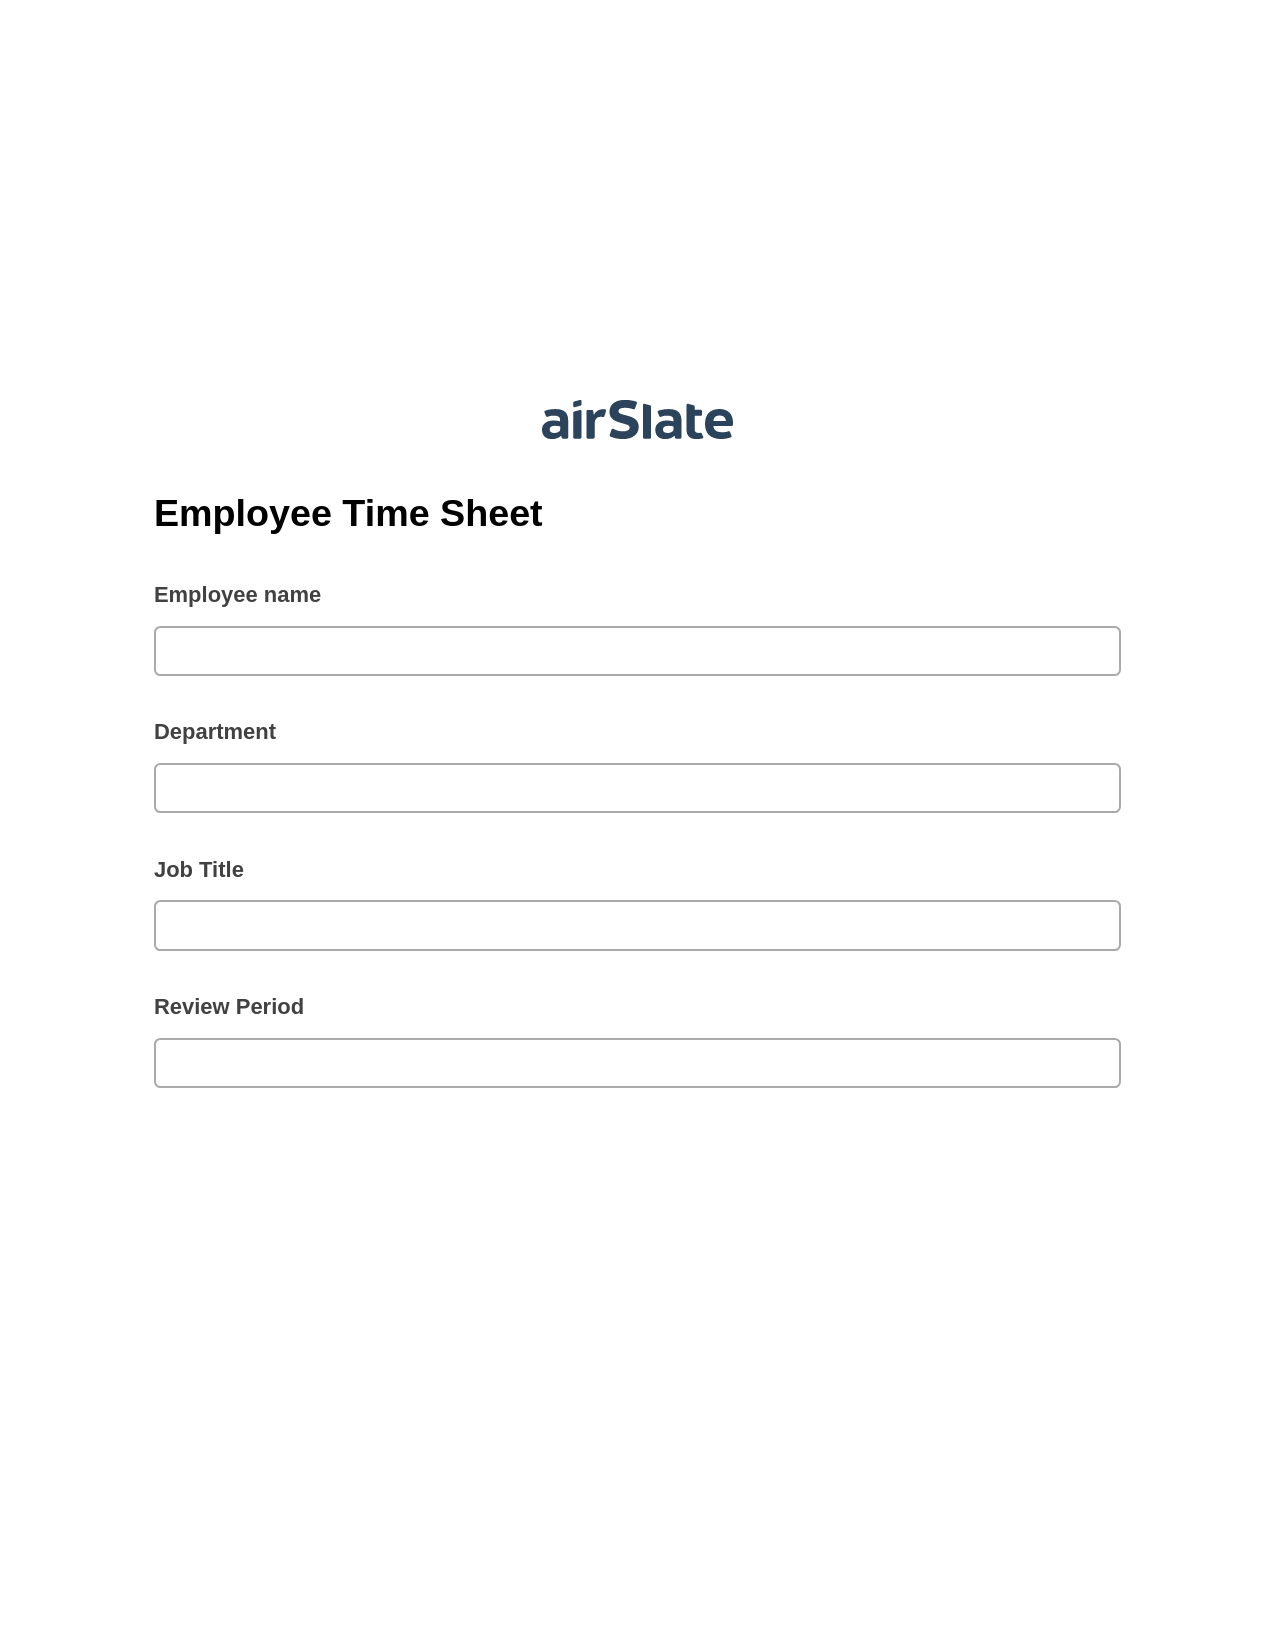 Employee Time Sheet Pre-fill from Salesforce Records with SOQL Bot, Create slate addon, Export to Excel 365 Bot